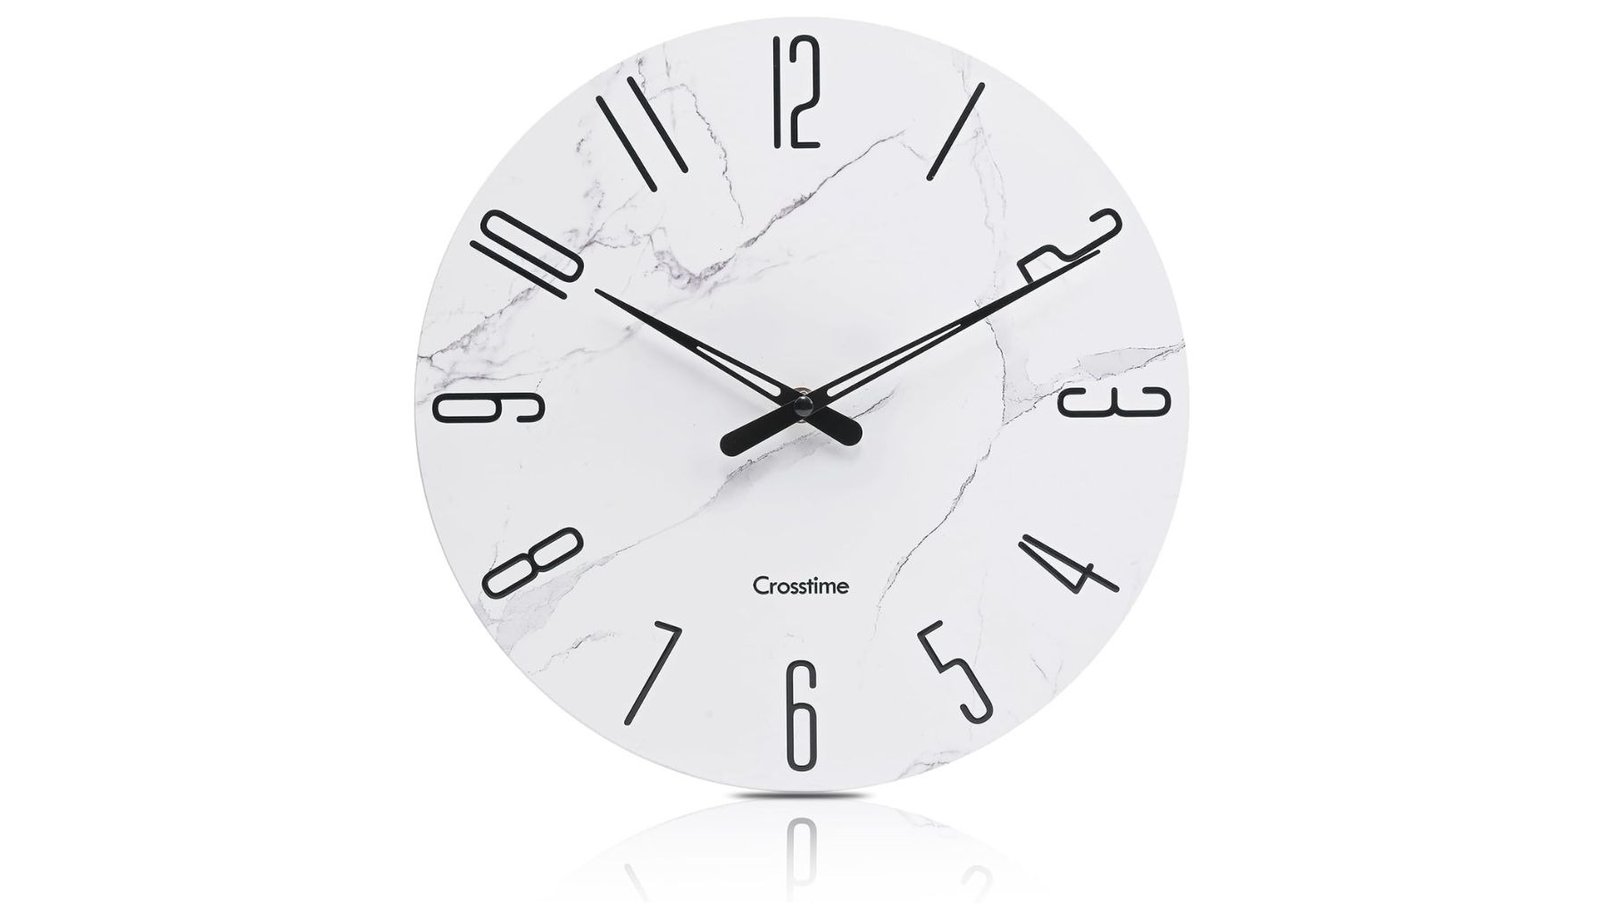 Crosstime 12 Inch Analog Modern Wall Clock Review